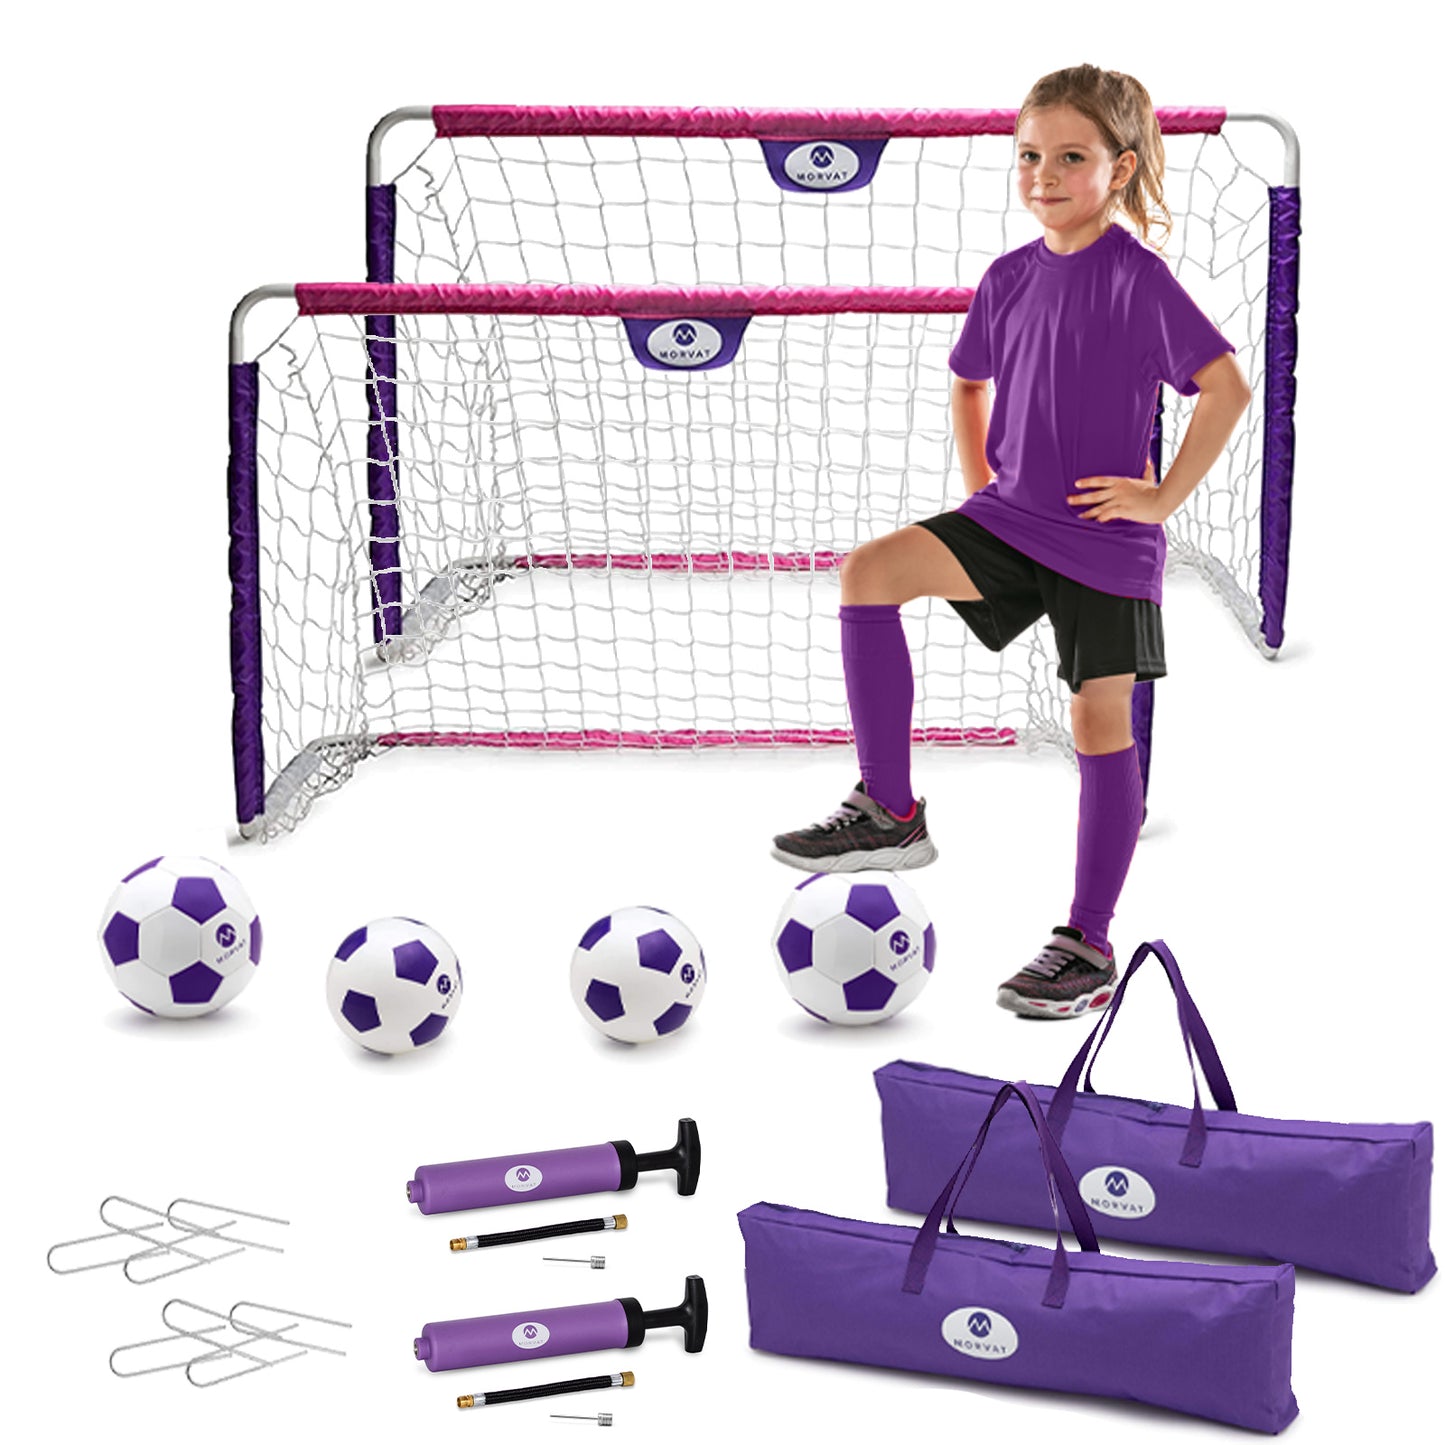 Black & White and Pink & Purple Soccer Goal Net Sets for Kids